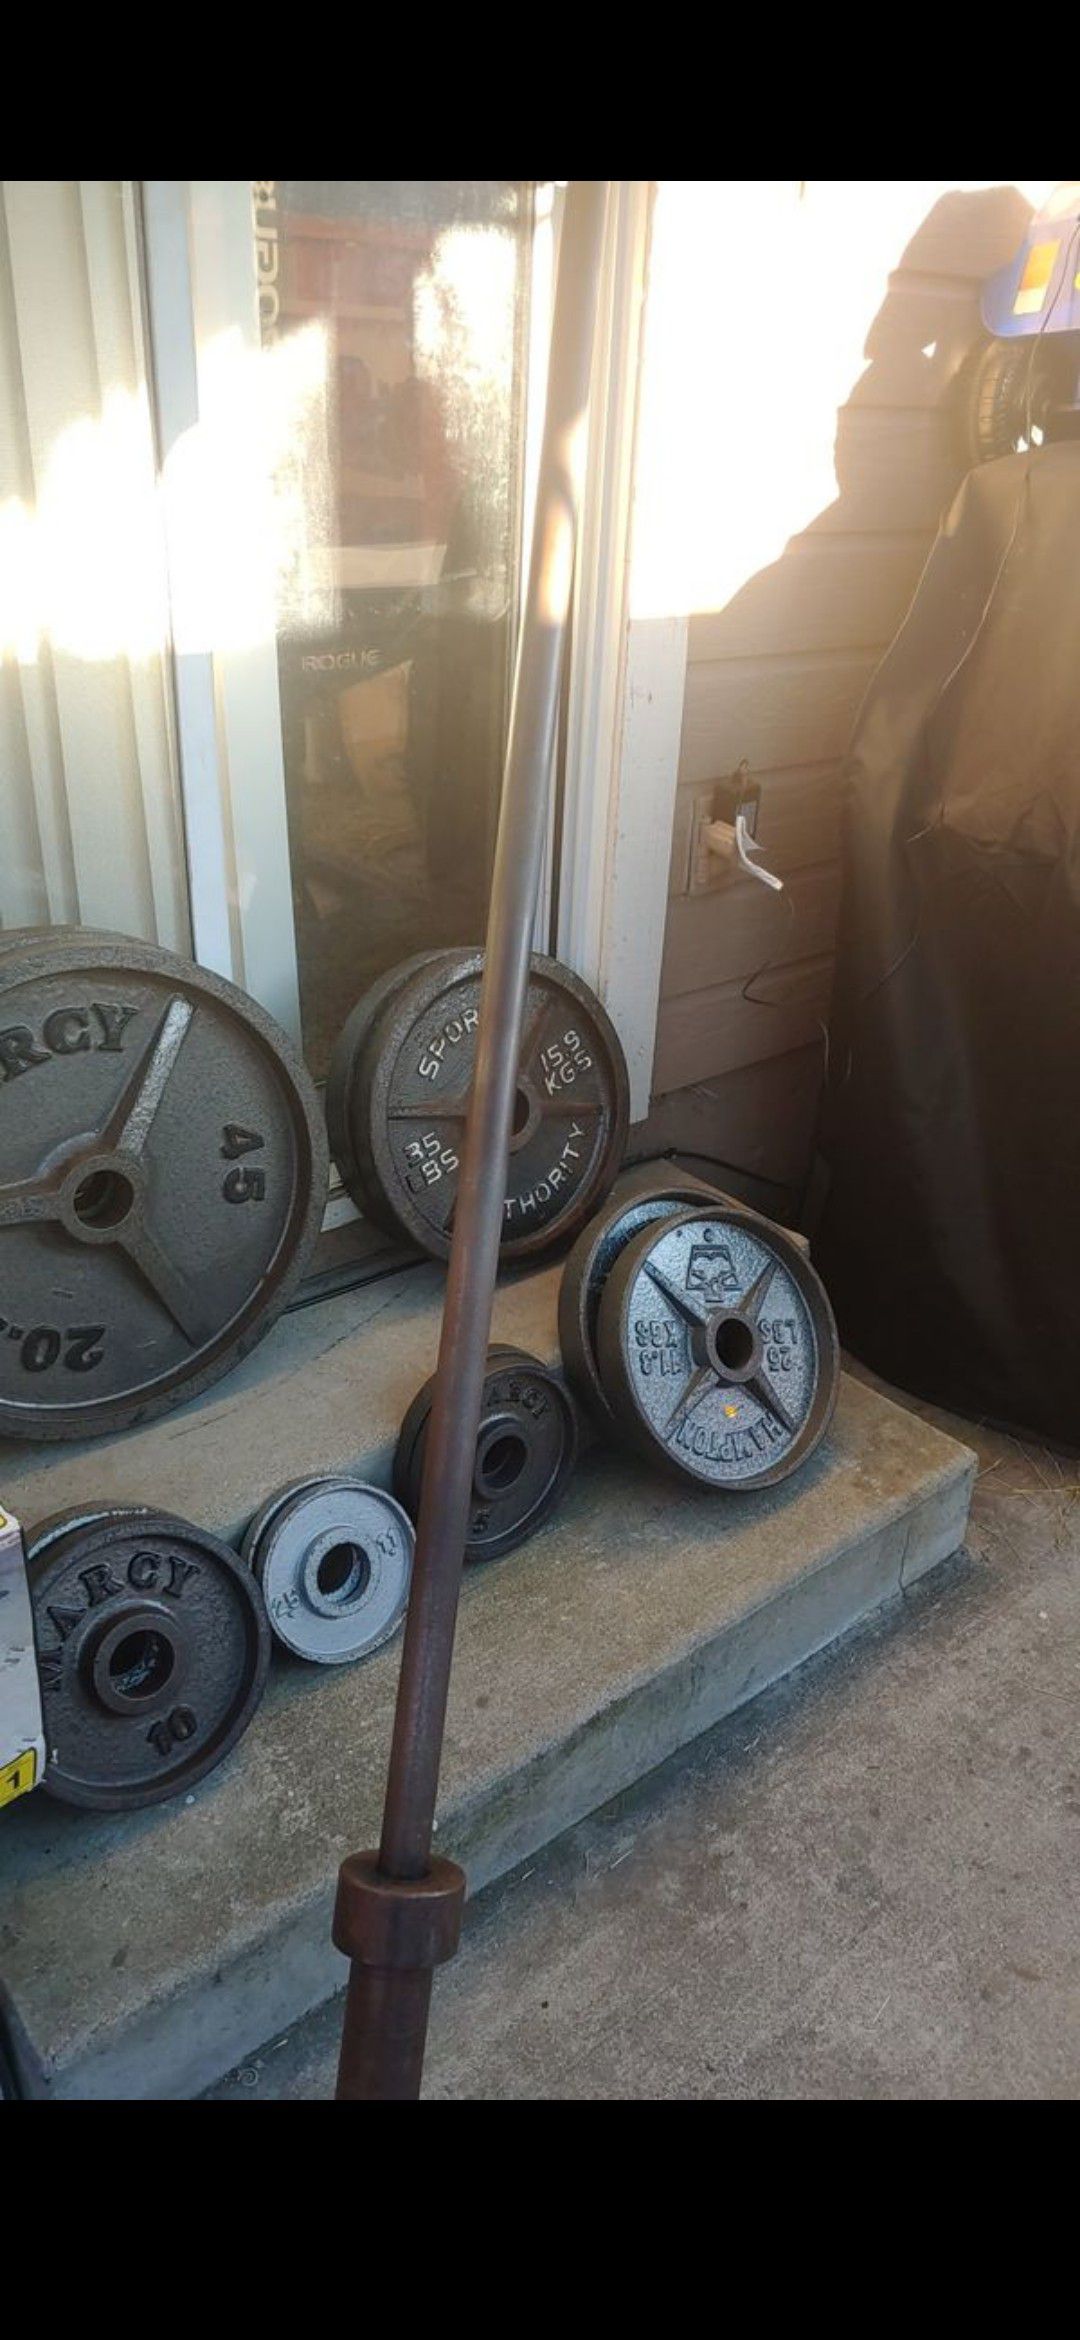 Olympic weight set with bar. 305 w 45lb bar. 350lb total.